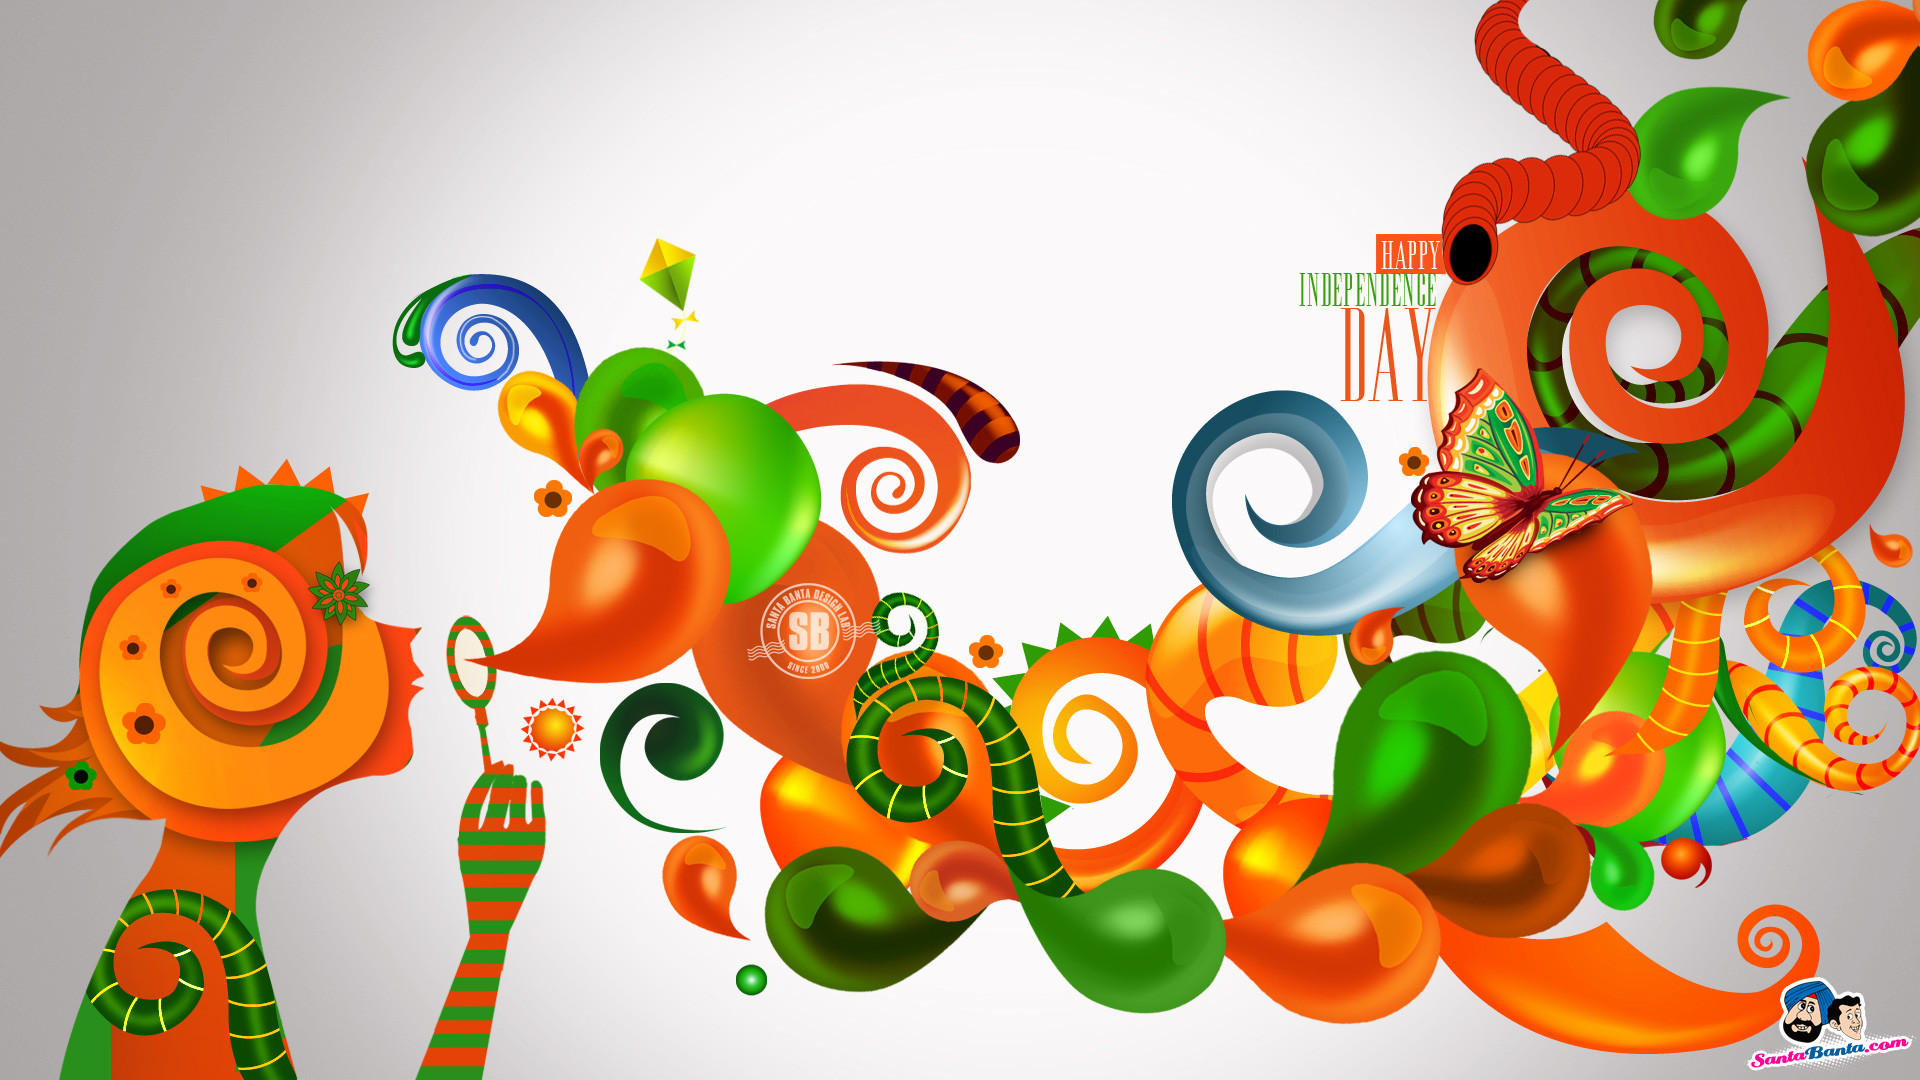 1920x1080 Indian Independence Day Wallpaper. Colorful Wallpaper